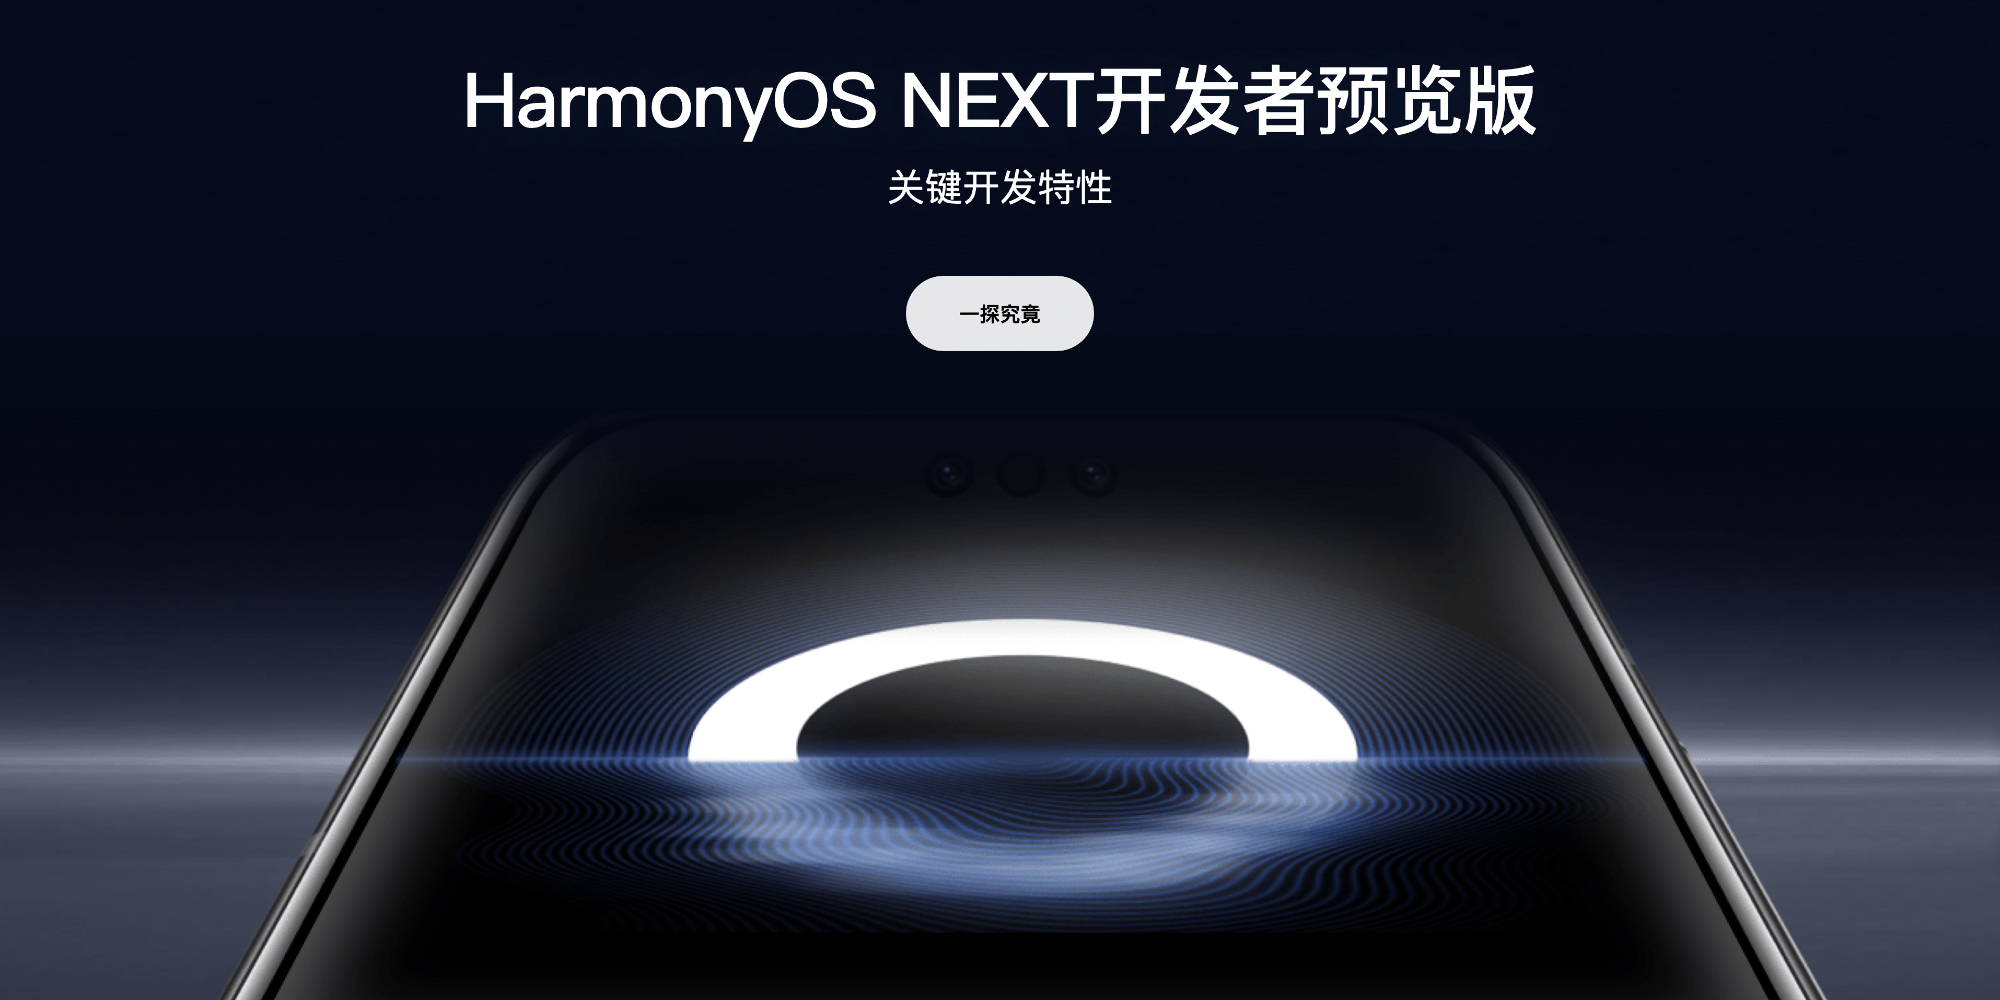 Huawei unveils HarmonyOS NEXT without Android App support